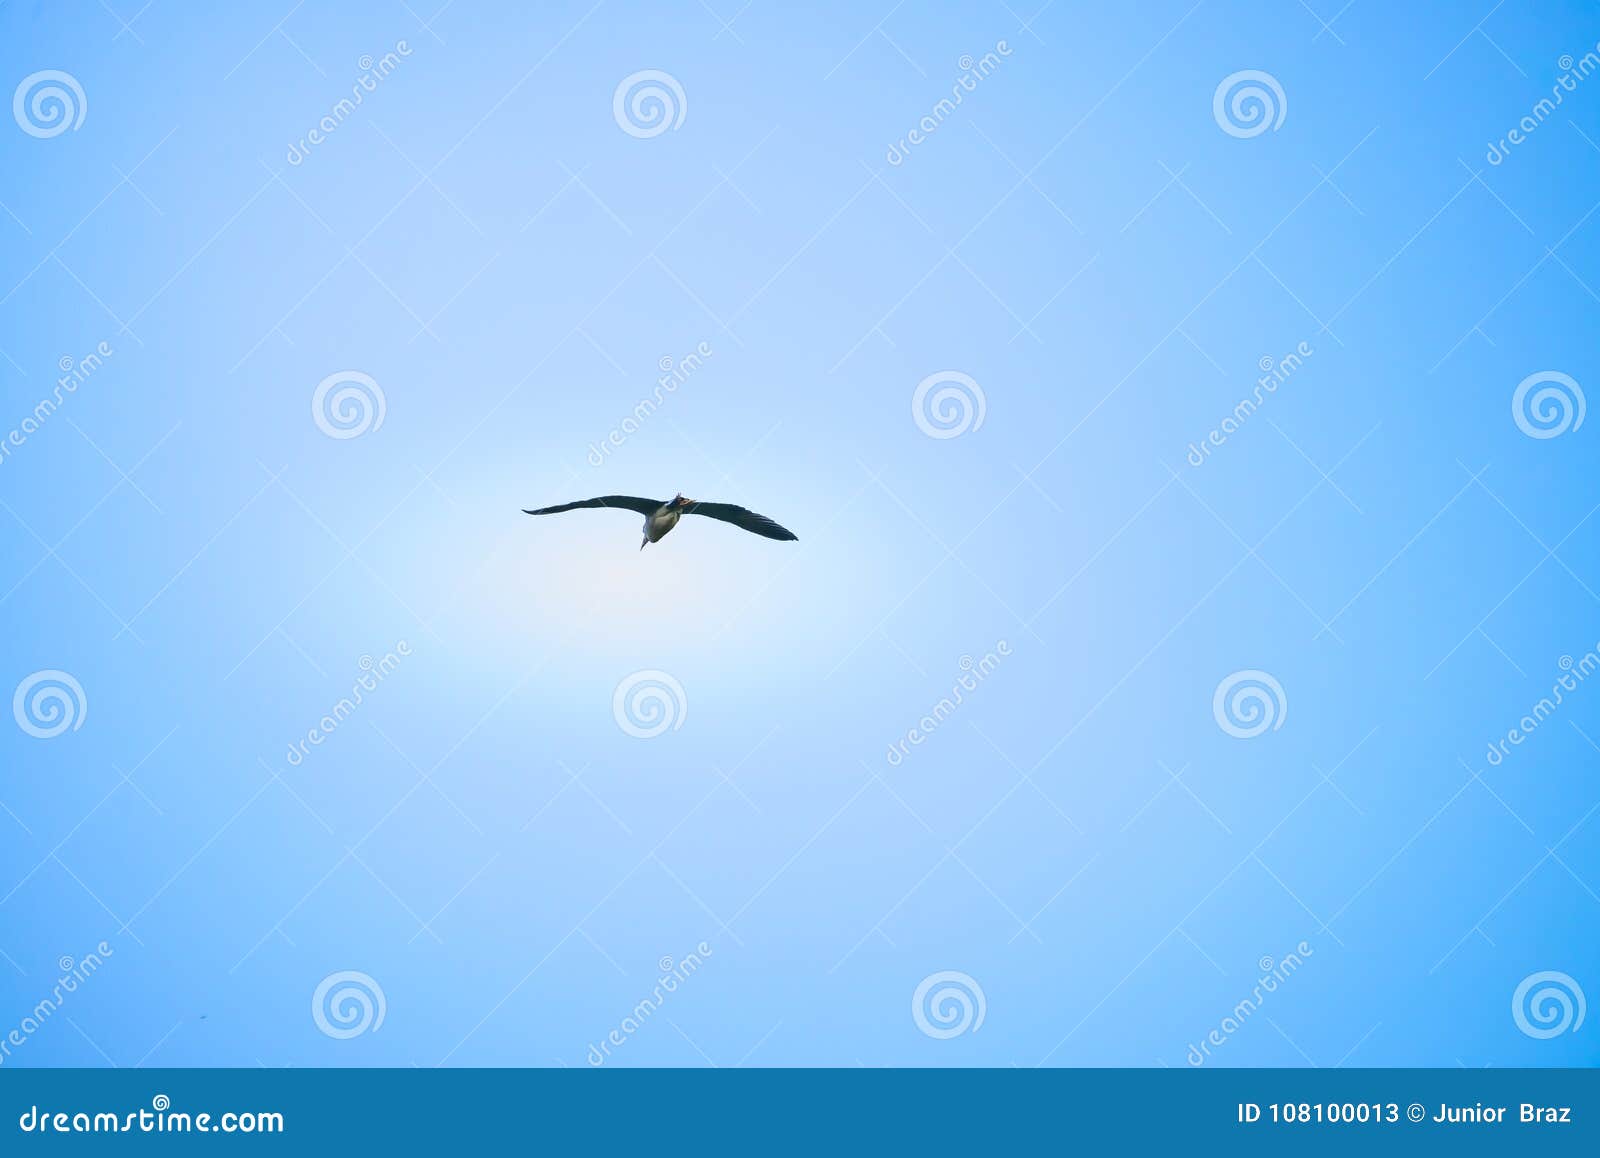 black crowned bird flying with sky as background